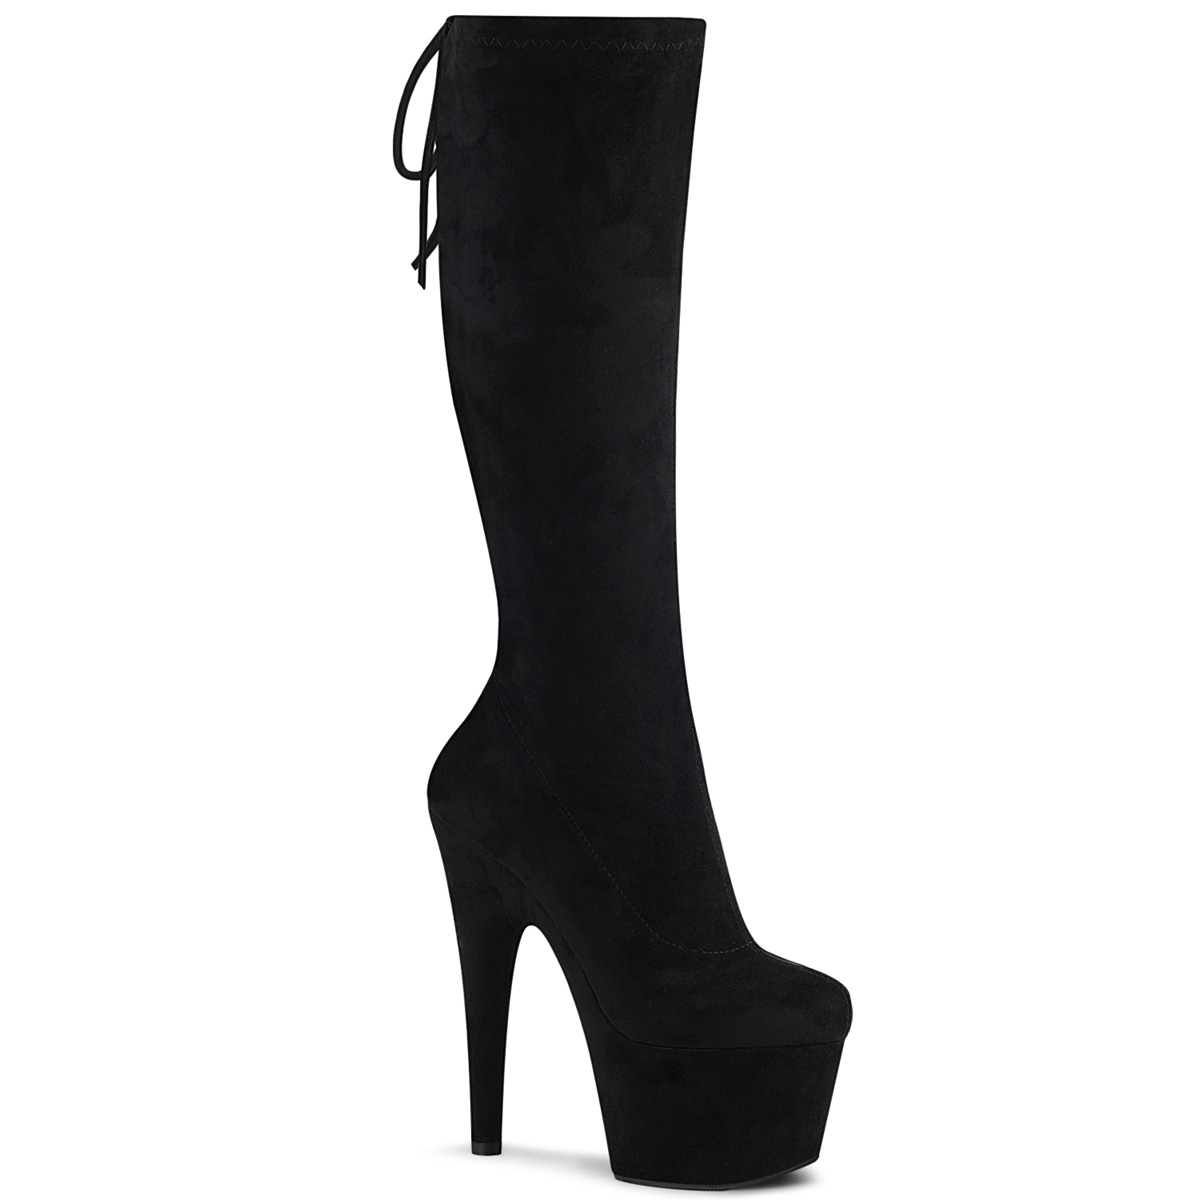 Pleaser SHOES & BOOTS : Platform Shoes : Knee High Boots